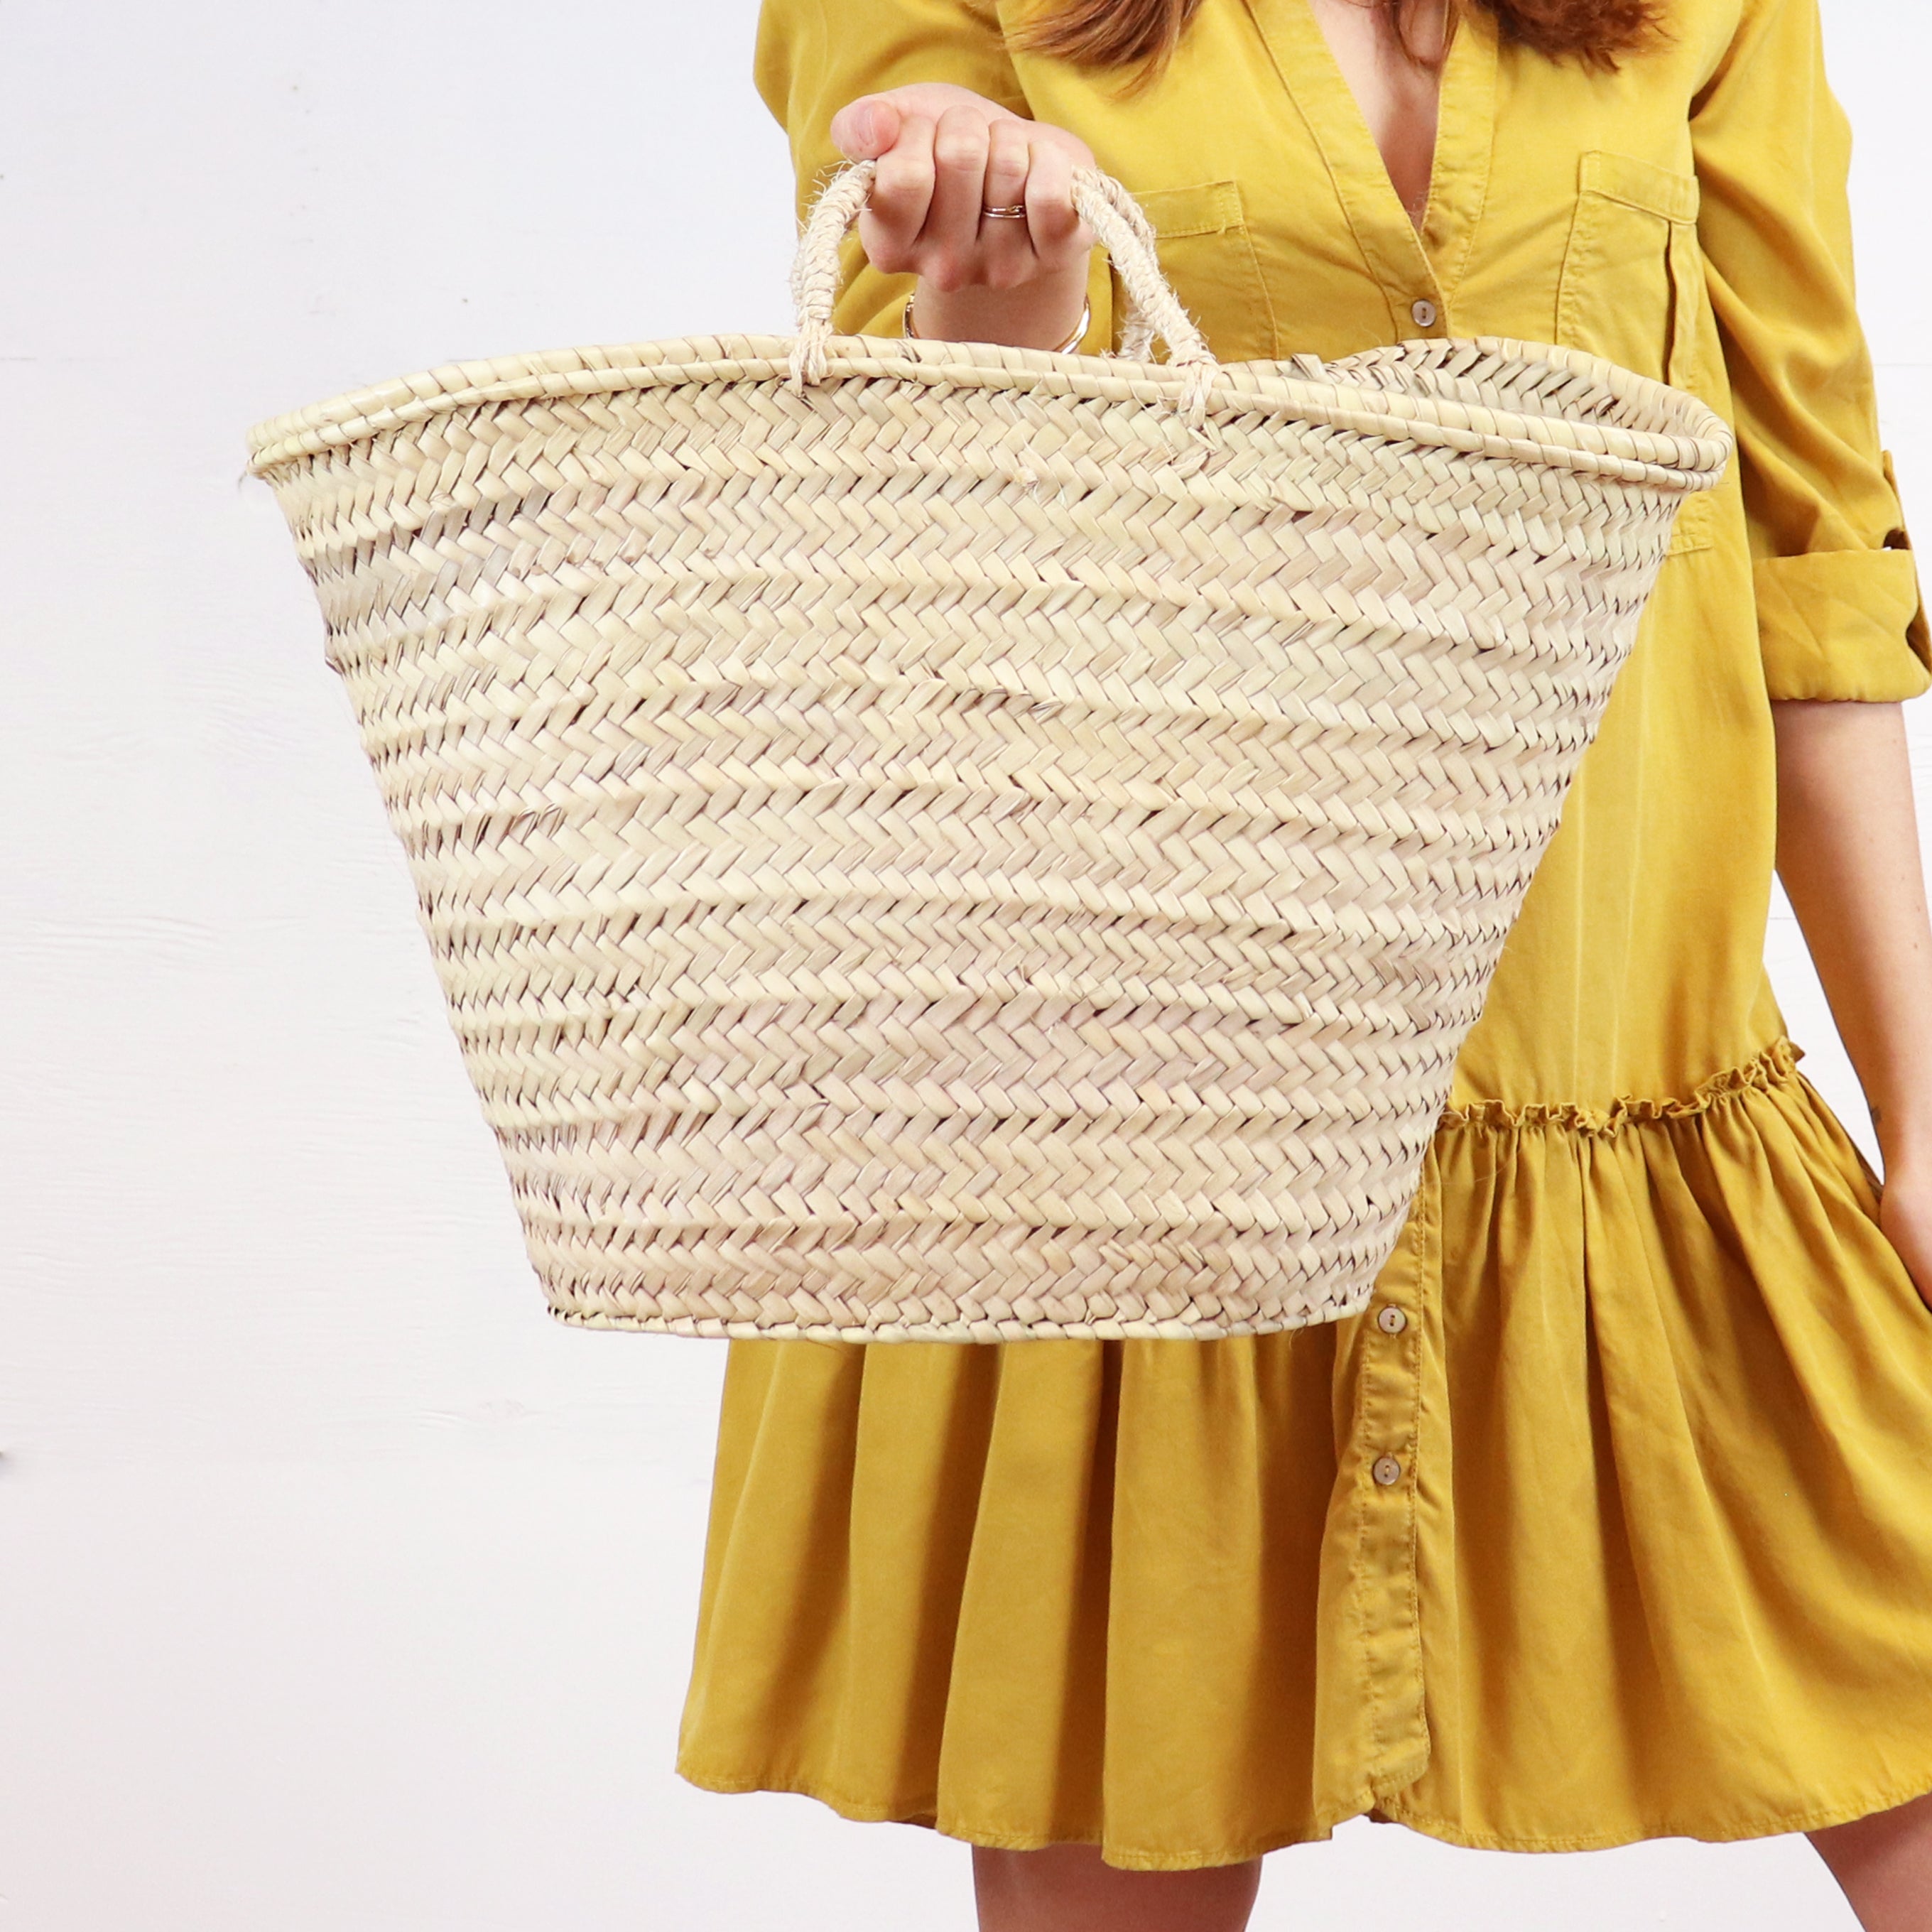 33 Insanely Cute Wicker Bags and Straw Bags for Summer